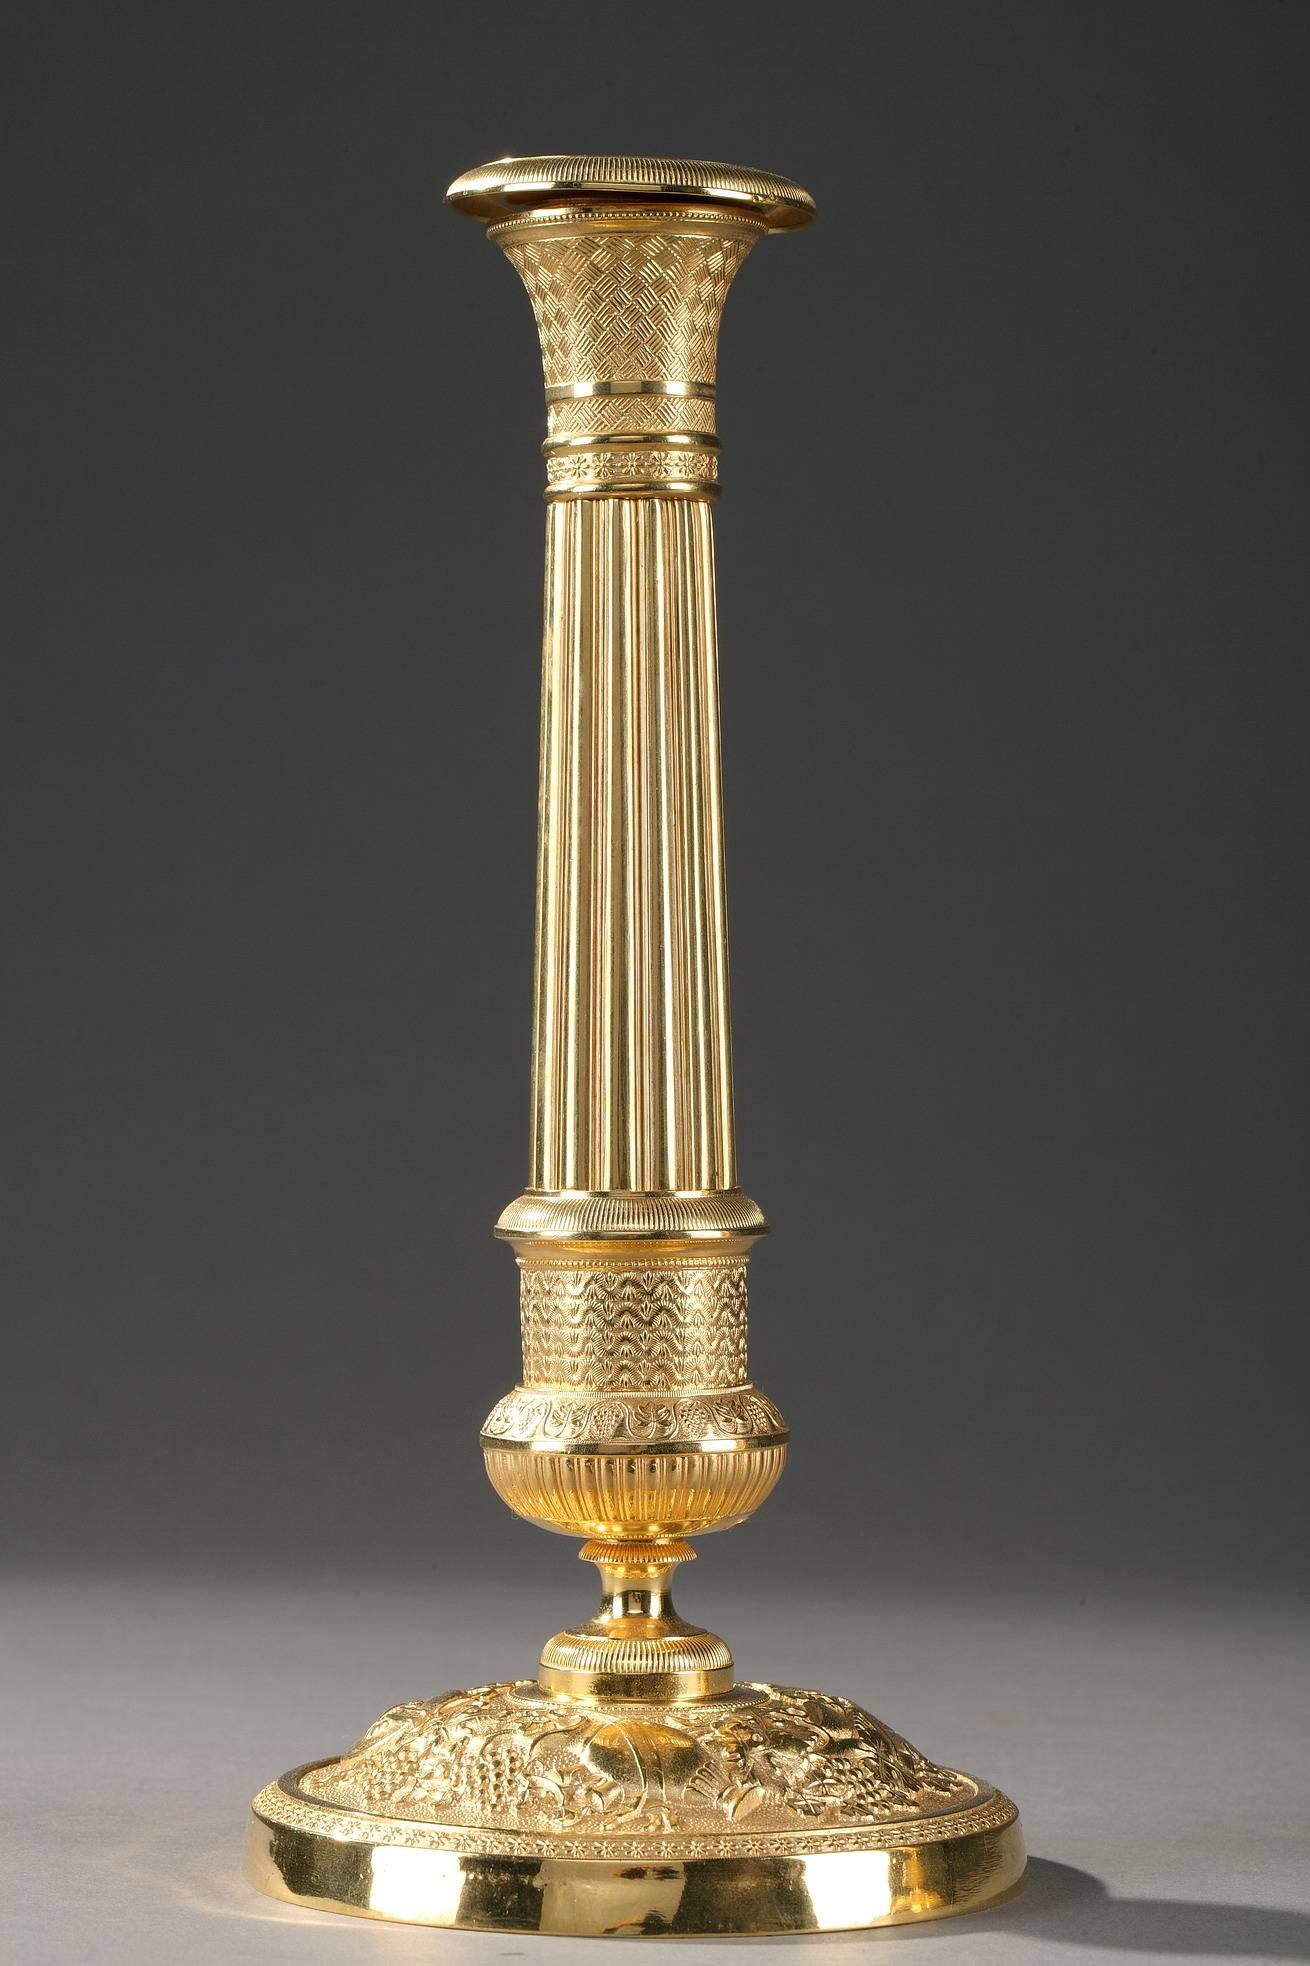 Pair of chiselled and gilt bronze restauration candlesticks, with a circular base decorated with flowers and Bacchus attributes (vine leaves, grapes and musical instruments) on a matte ground. The partially fluted stem is adorned with vine branches